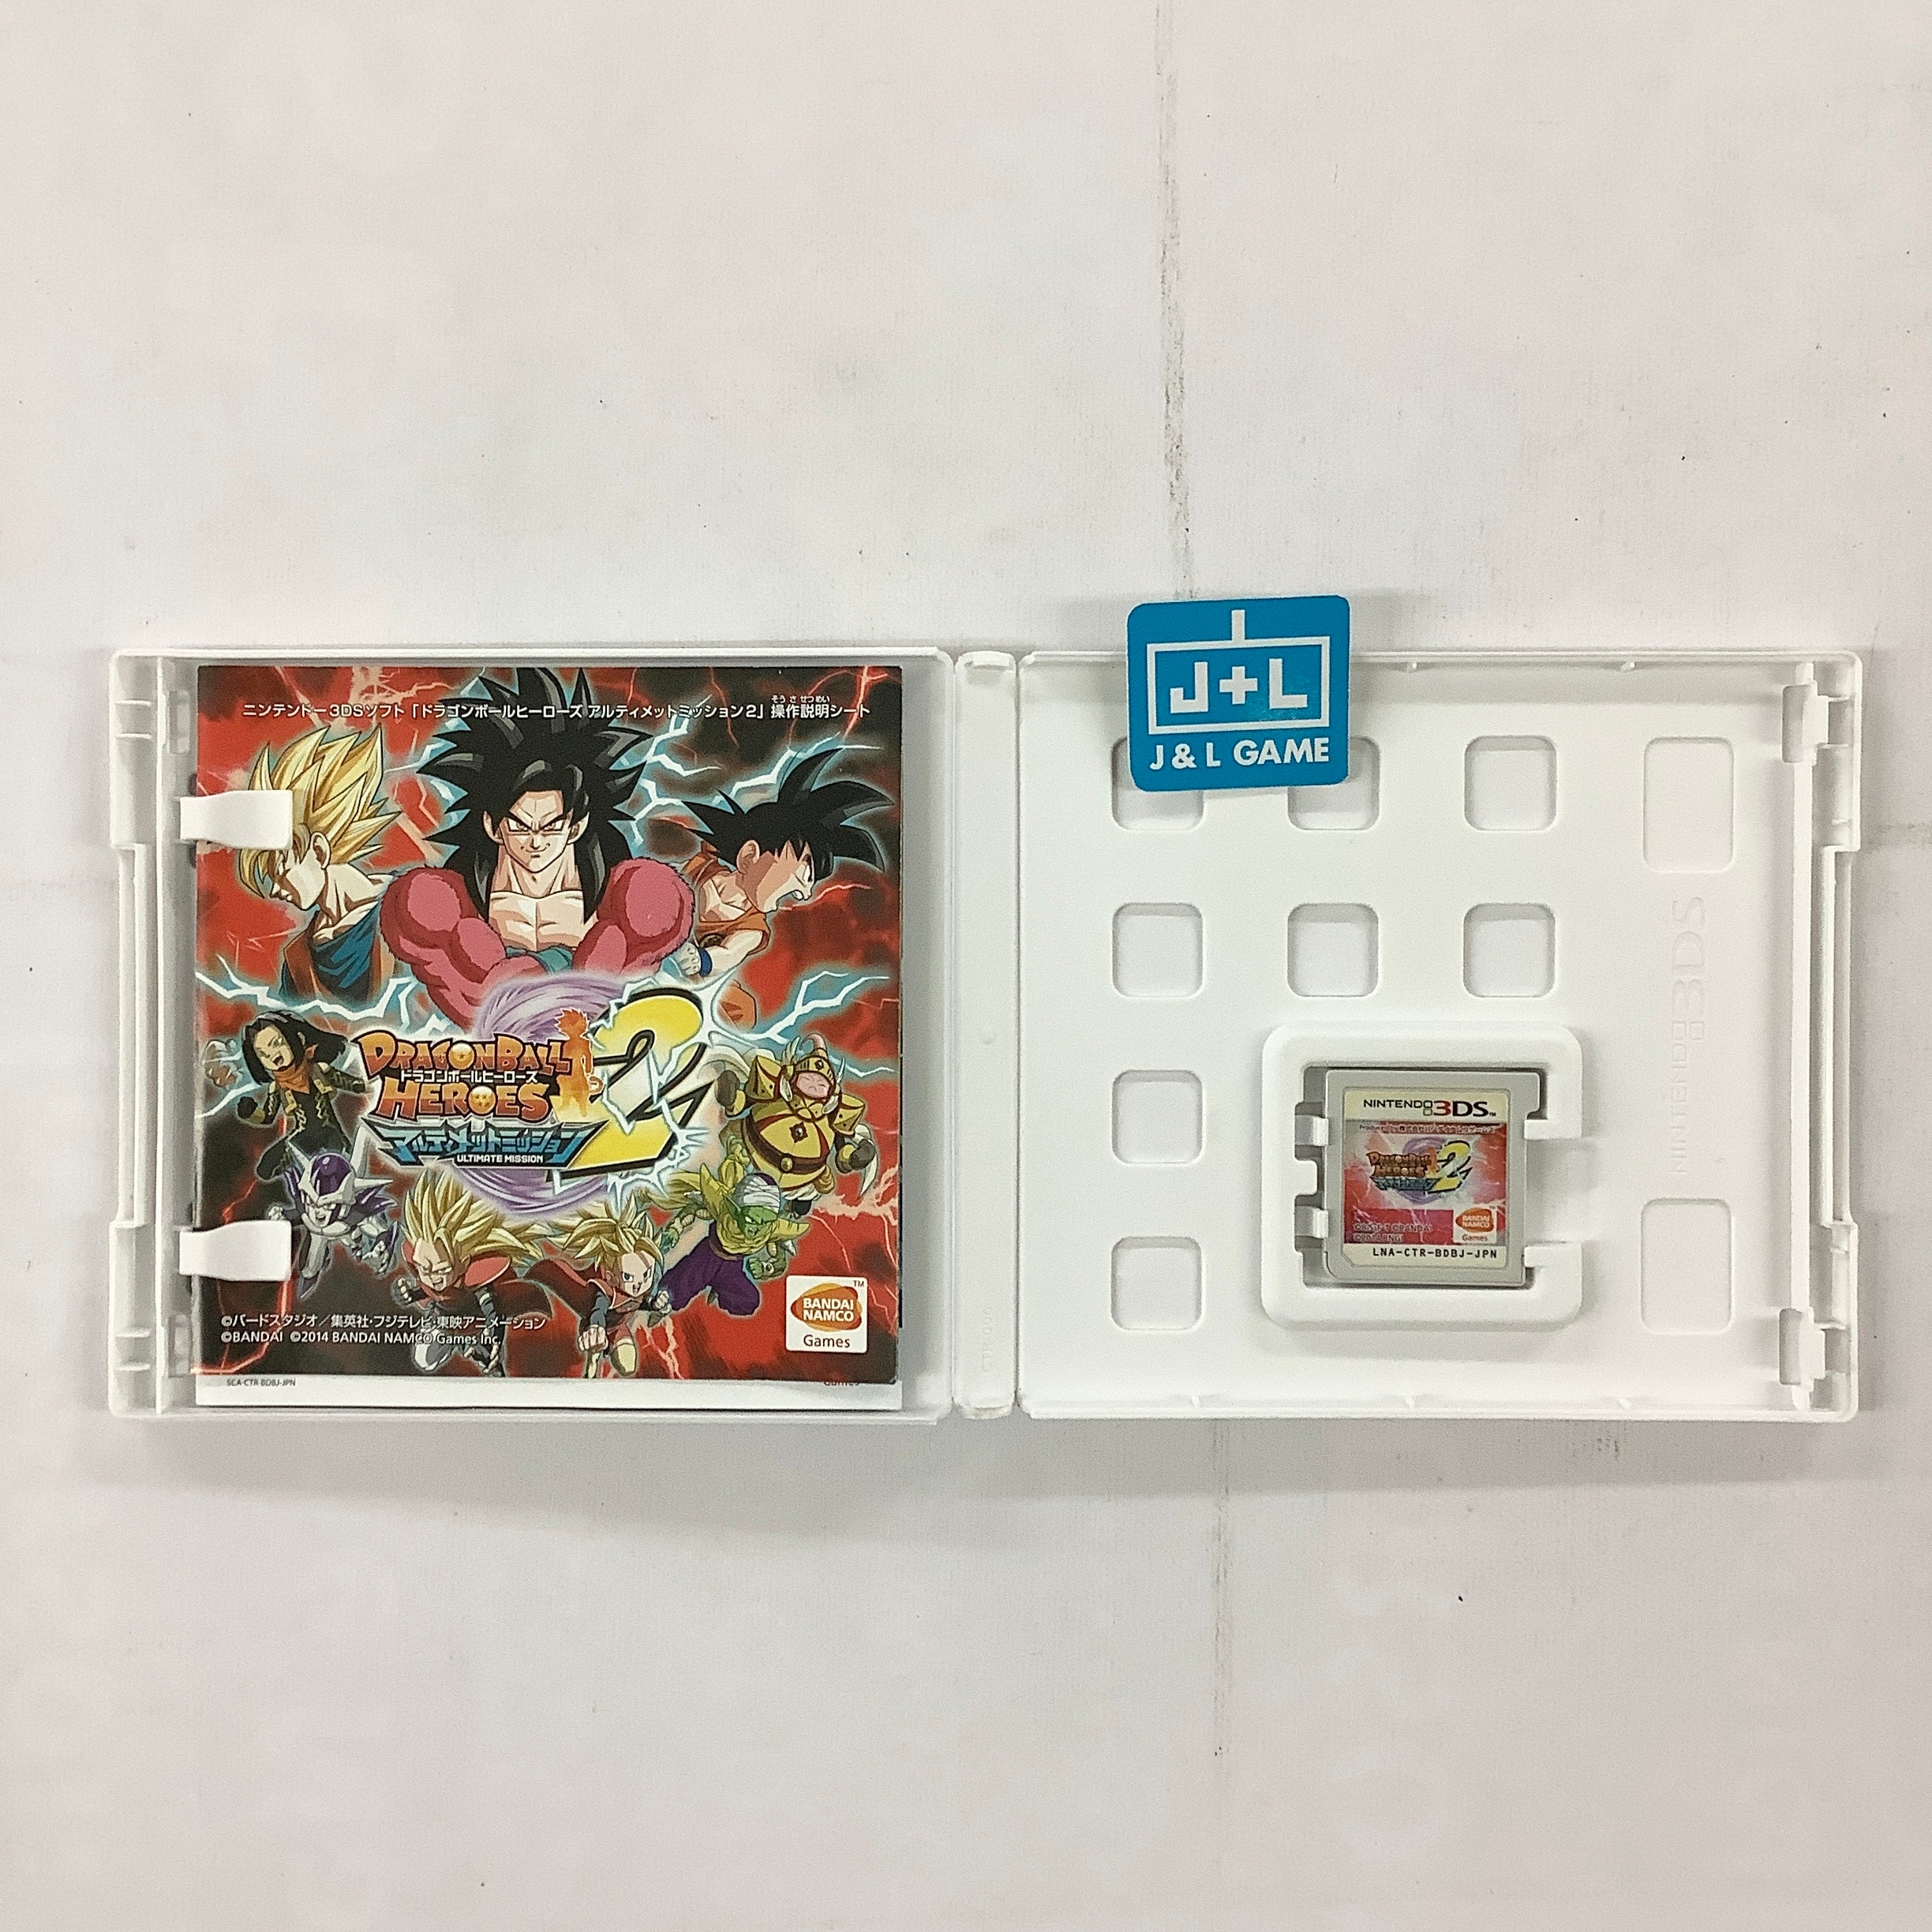 Dragon Ball Heroes: Ultimate Mission 2 - Nintendo 3DS [Pre-Owned] (Japanese Import) Video Games Bandai Namco Games   